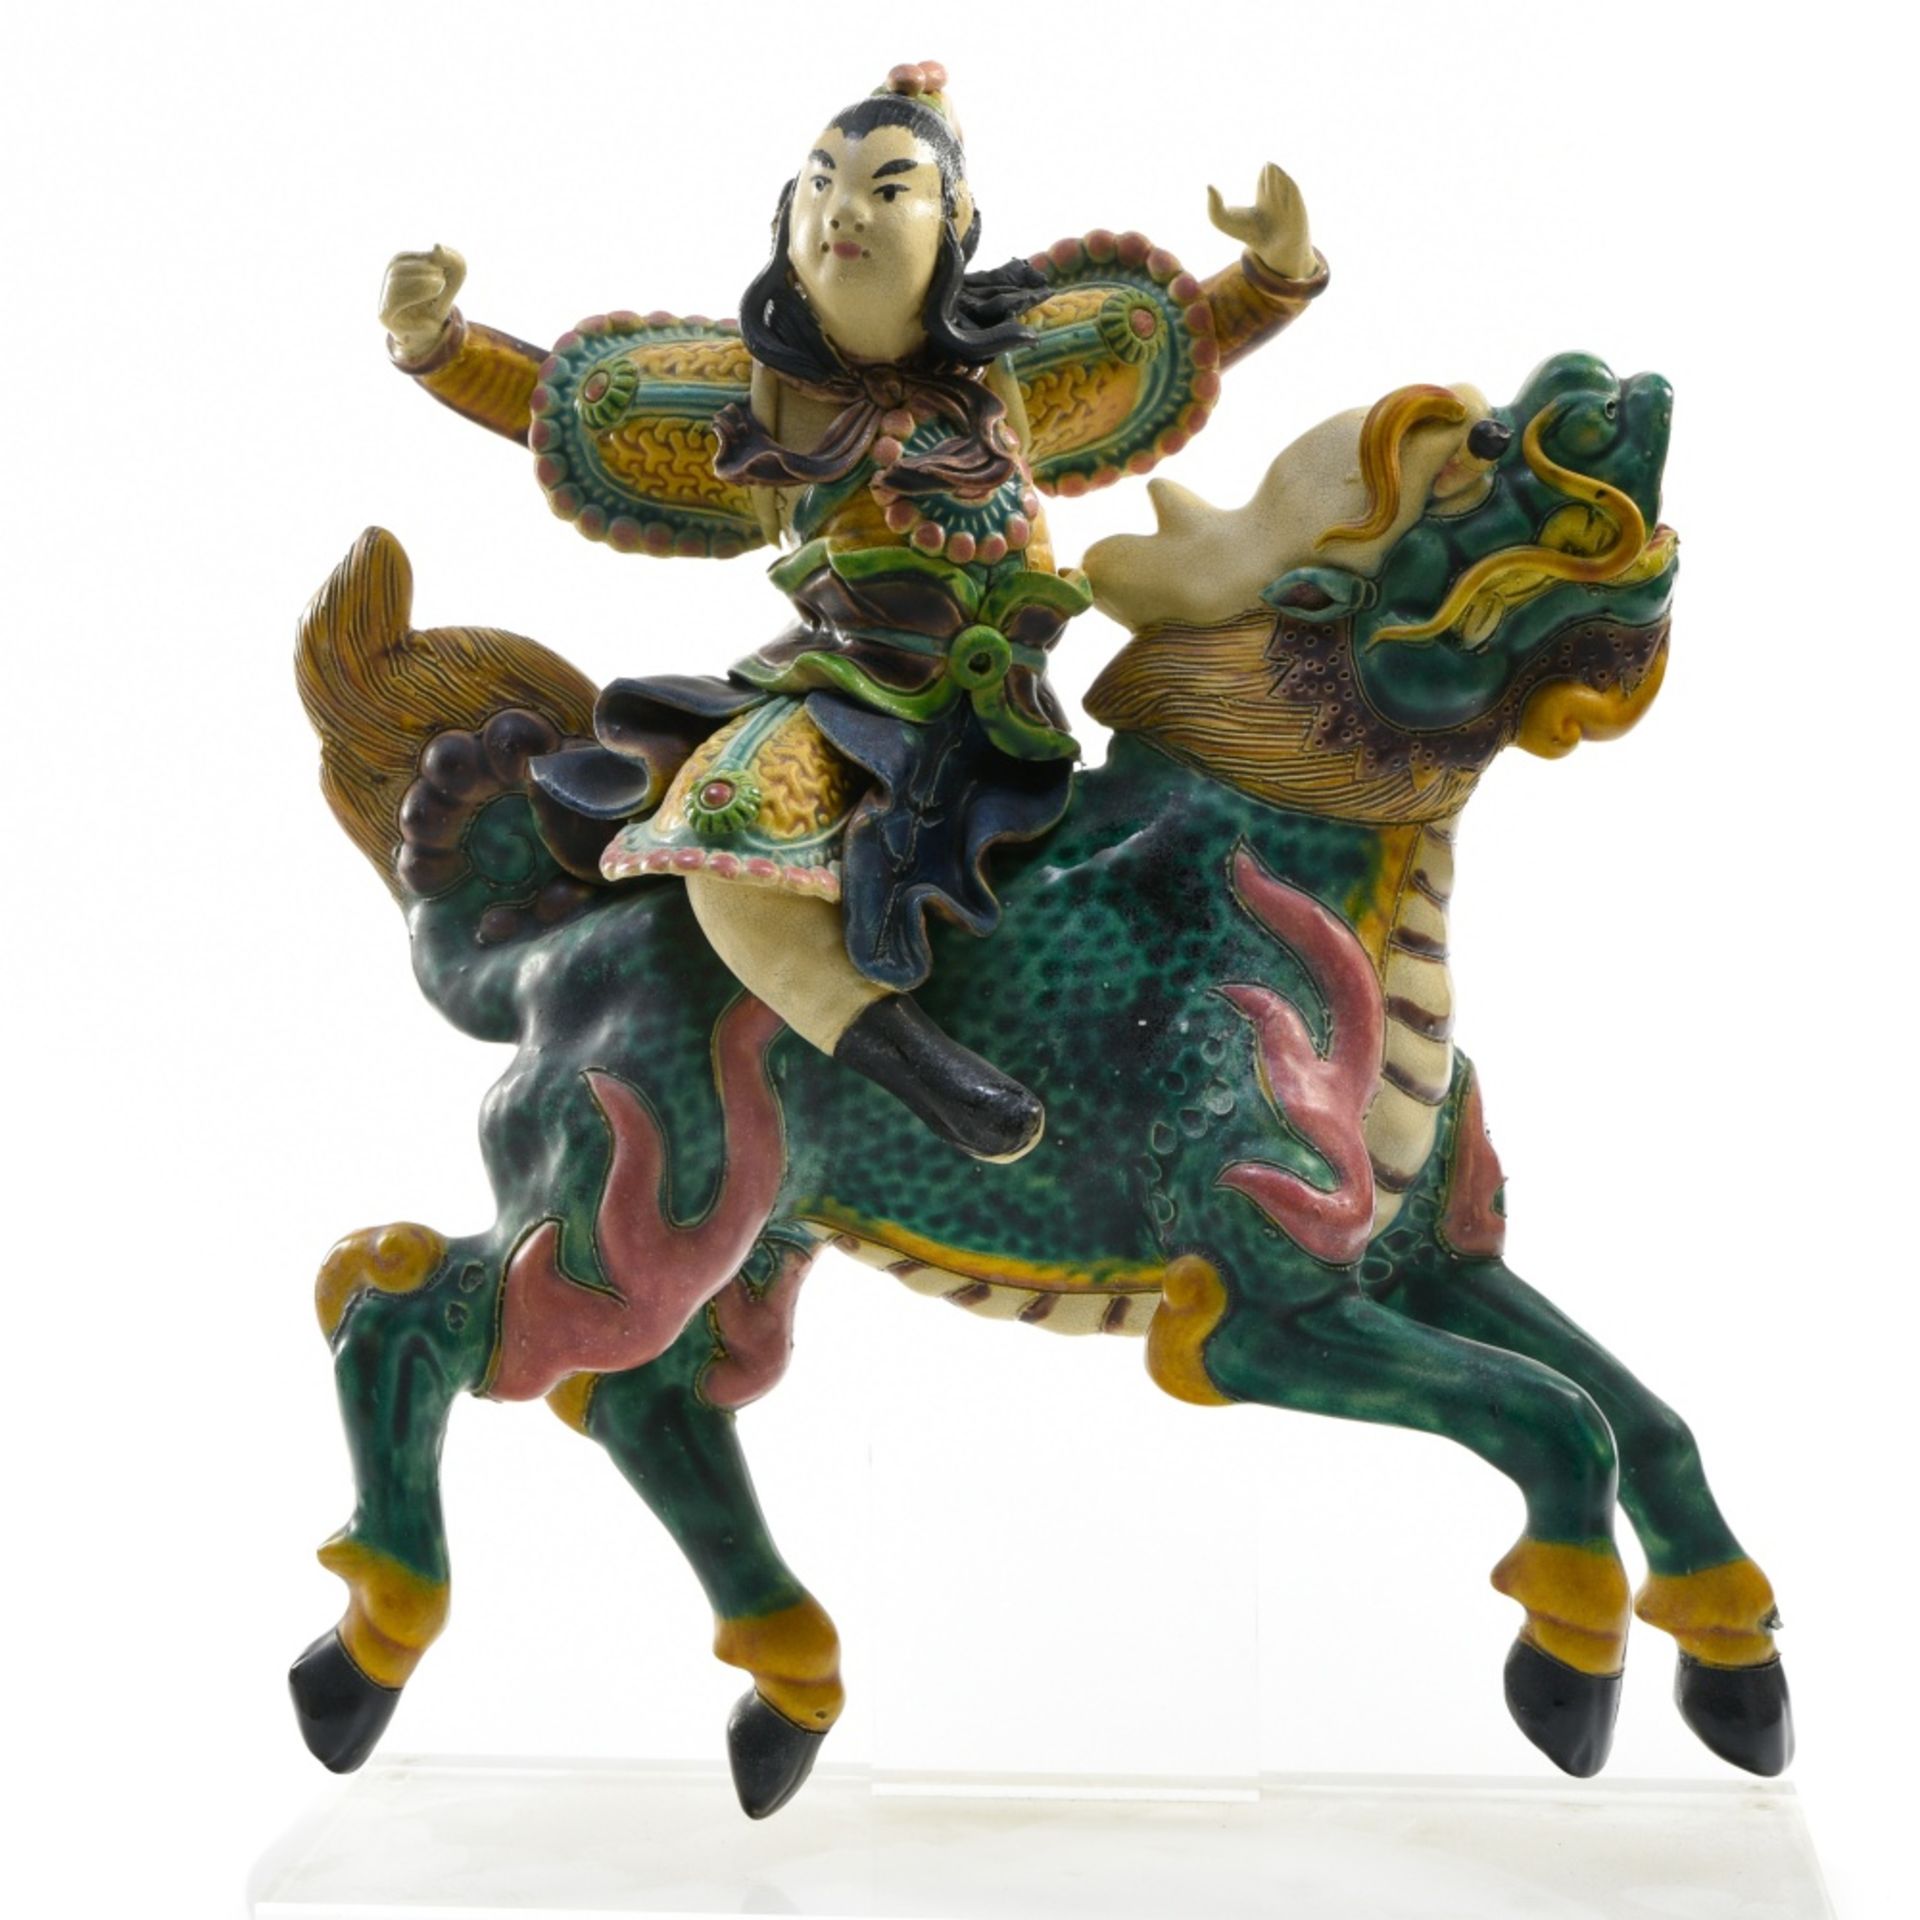 China, 20th century Immortal riding a qilin, Polychrome majolica. On a stand. Height (cm) : 23 -